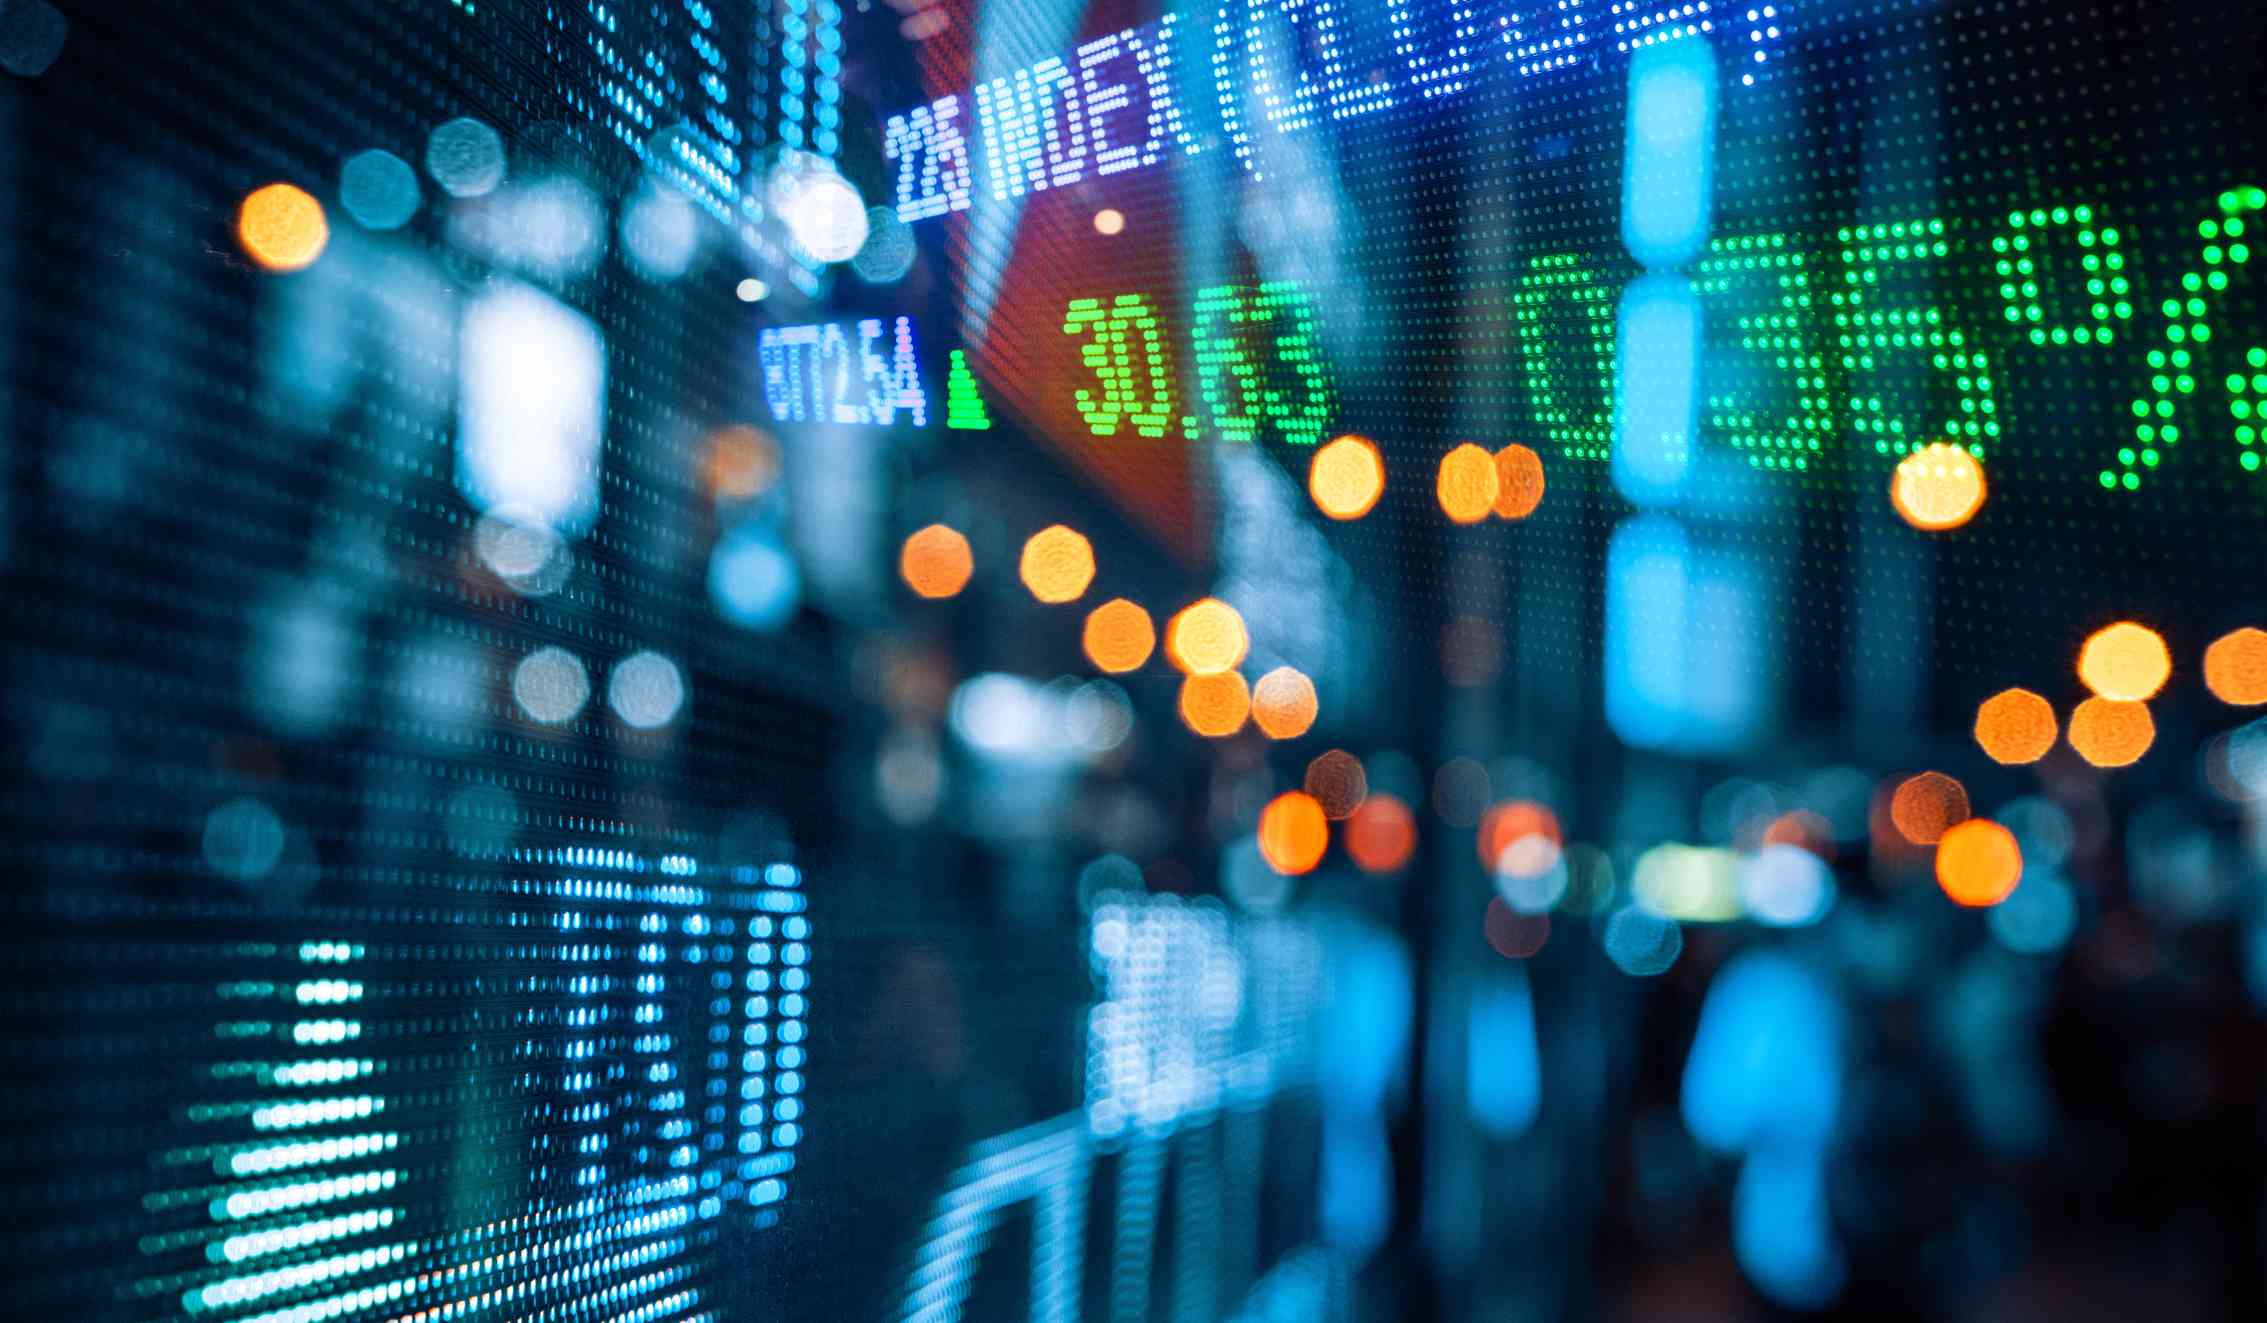 Colorful stock market quotes display reflected on glass